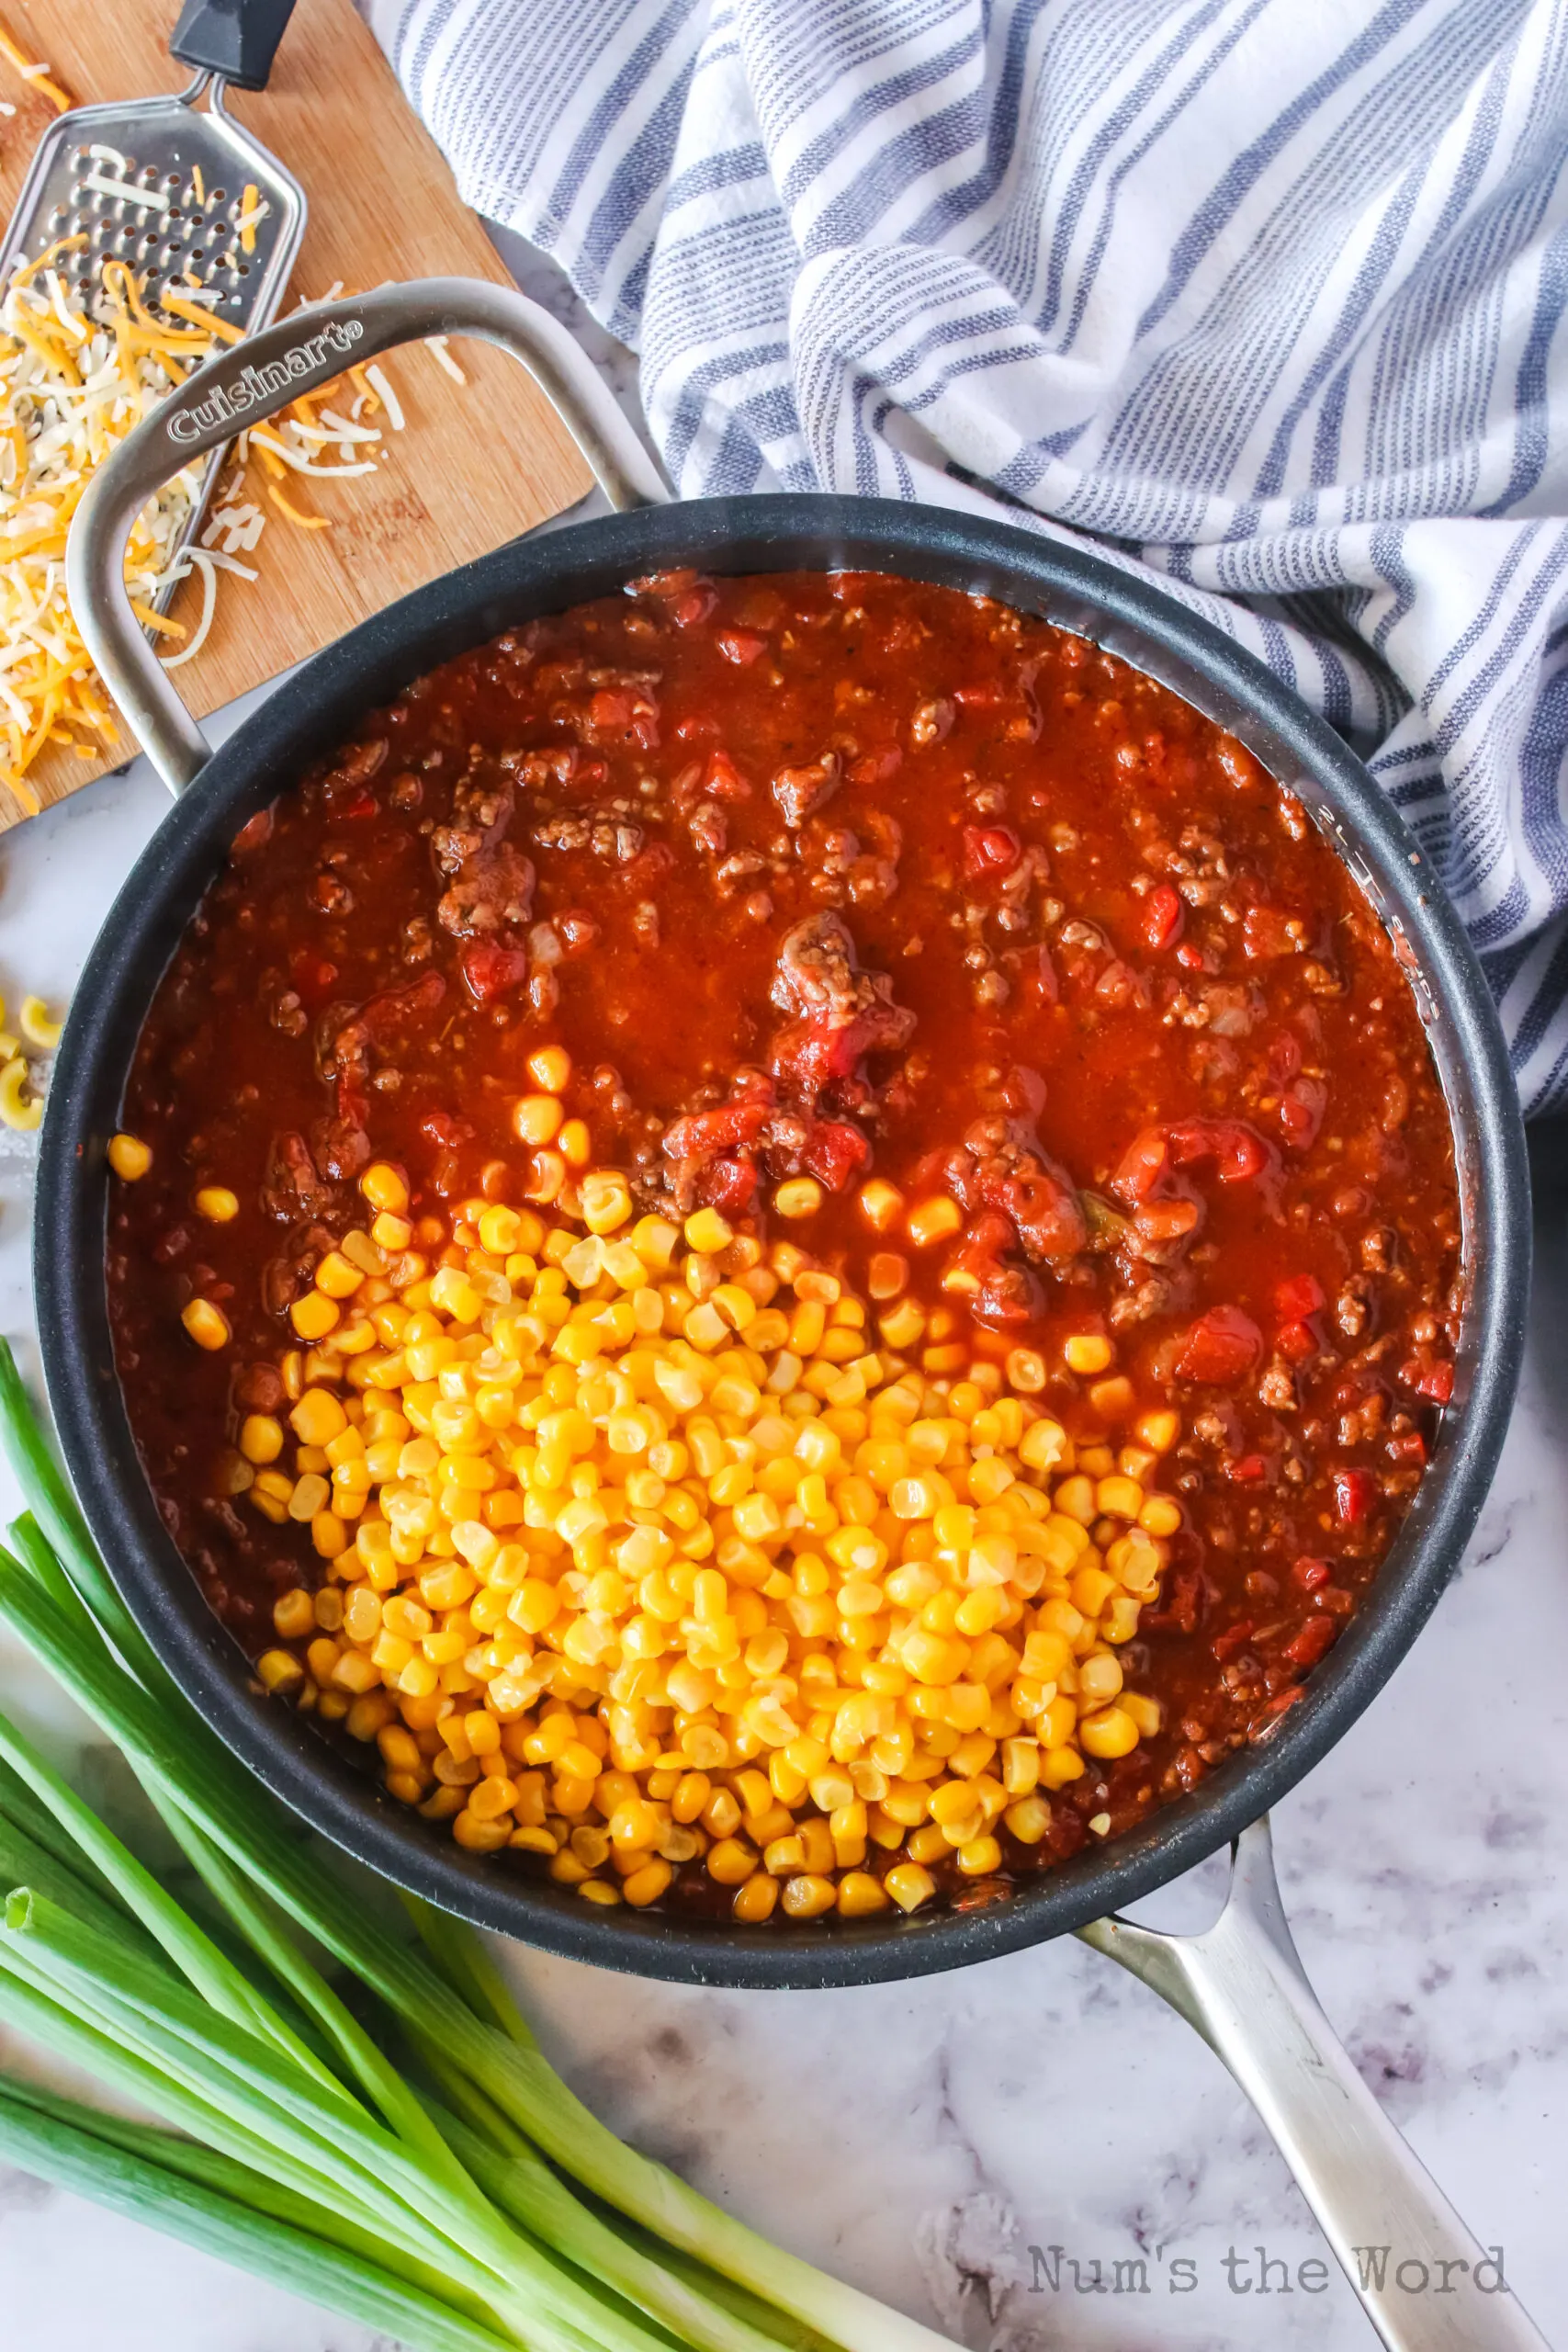 Corn added to beef mixture